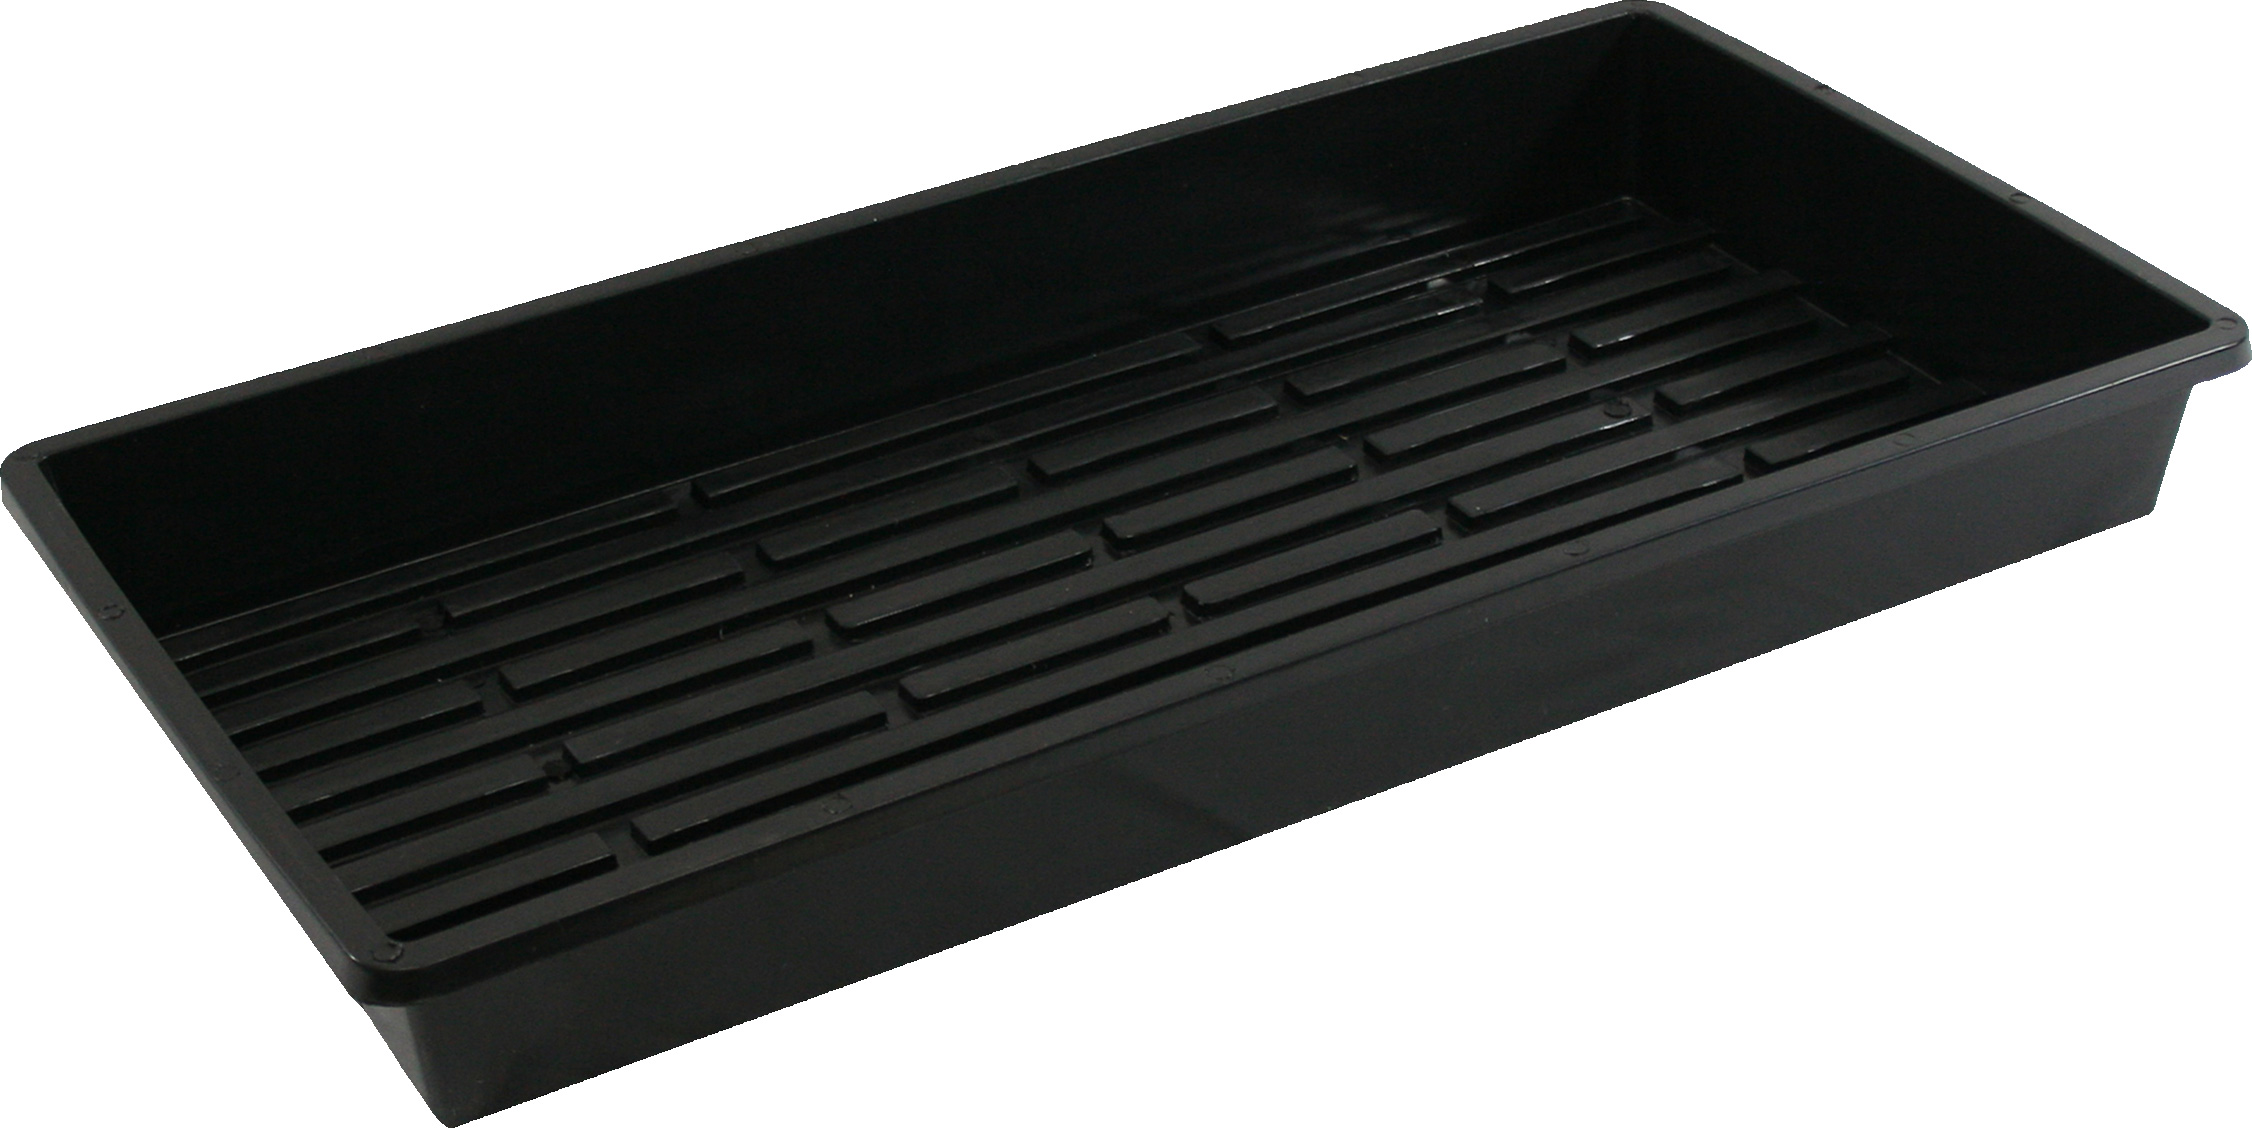 Picture for SunBlaster 1020 Quad Thick Tray